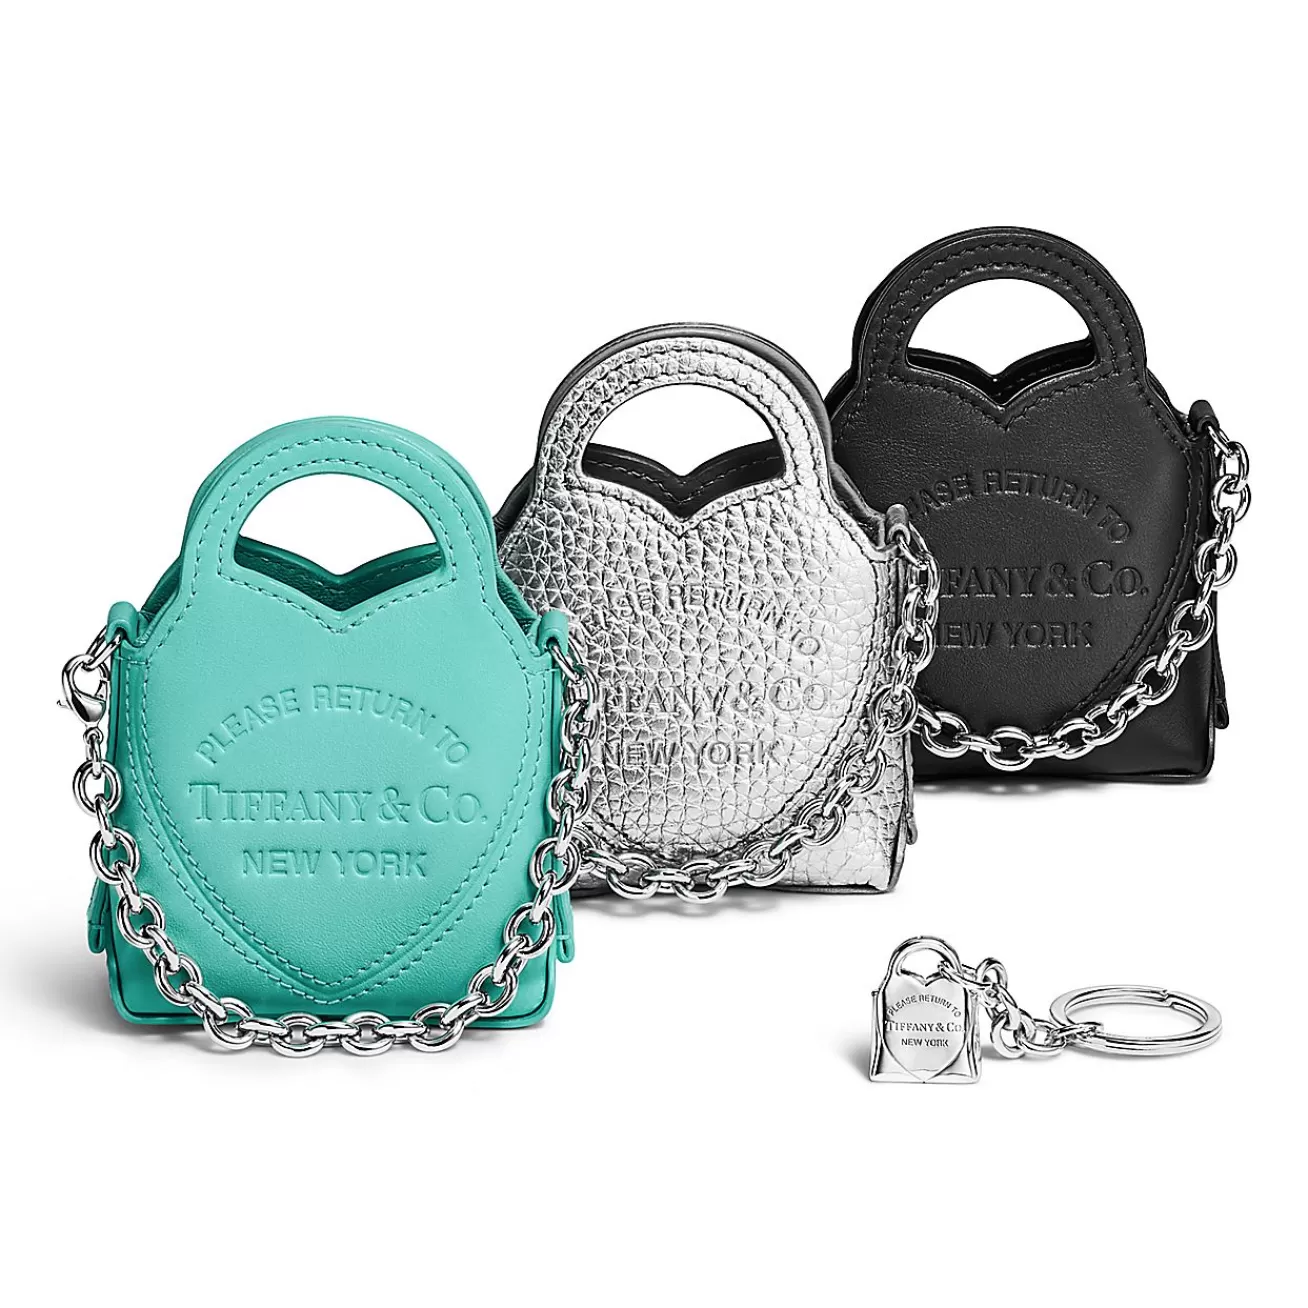 Tiffany & Co. Return to Tiffany® Nano Bag Set in Multicolored Leather with a Key Ring | ^Women Tiffany Blue® Gifts | Small Leather Goods